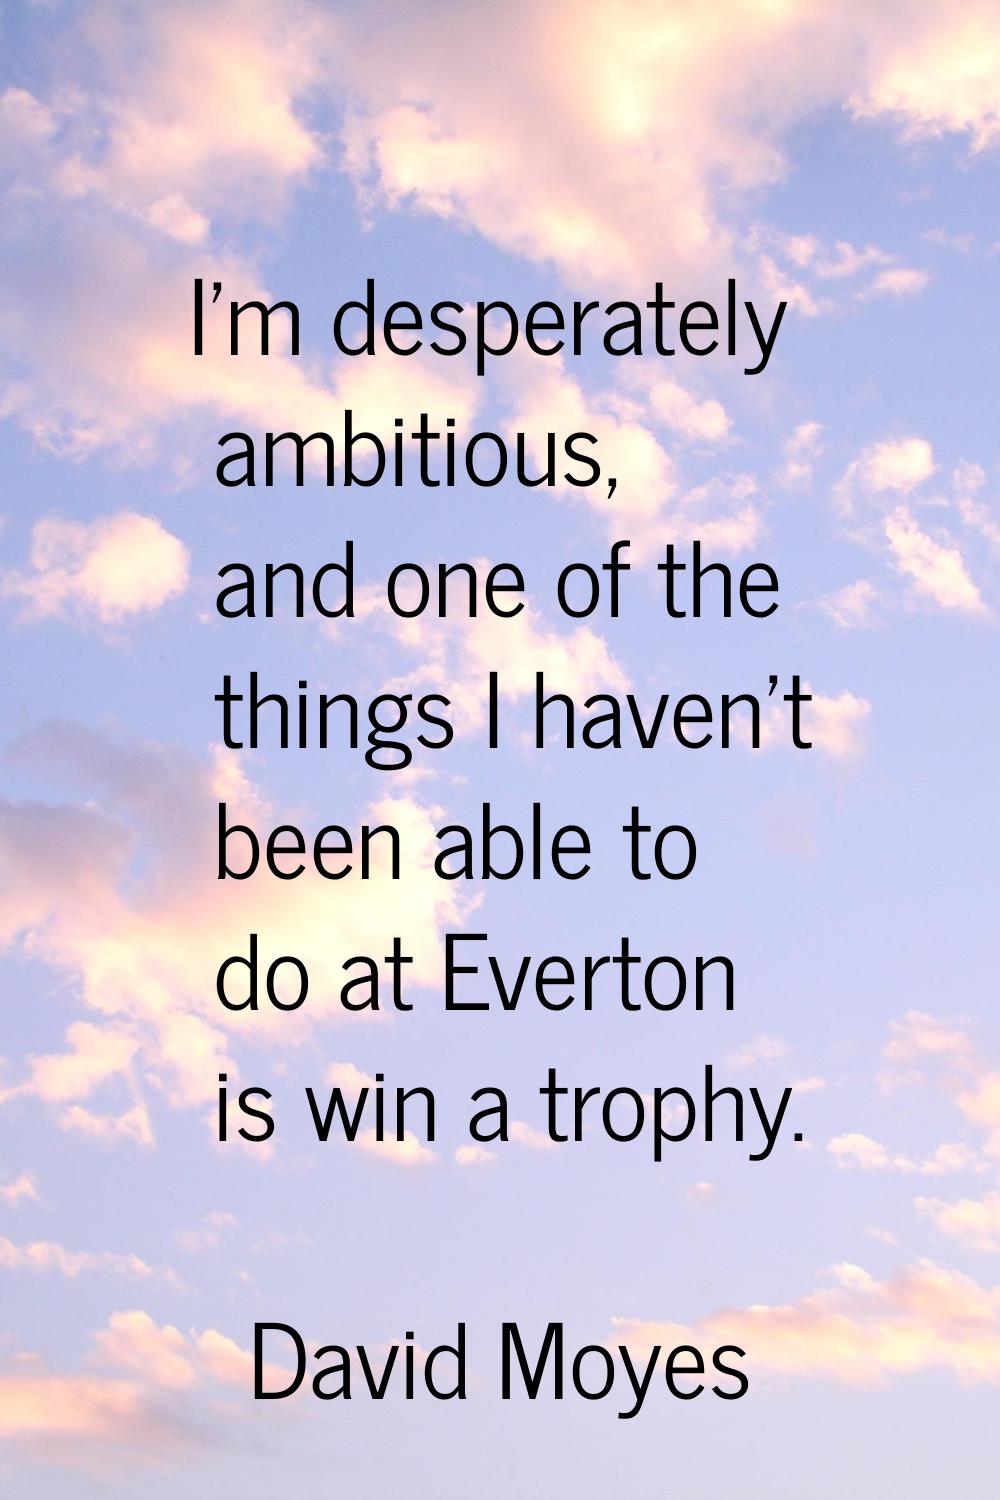 I'm desperately ambitious, and one of the things I haven't been able to do at Everton is win a trop